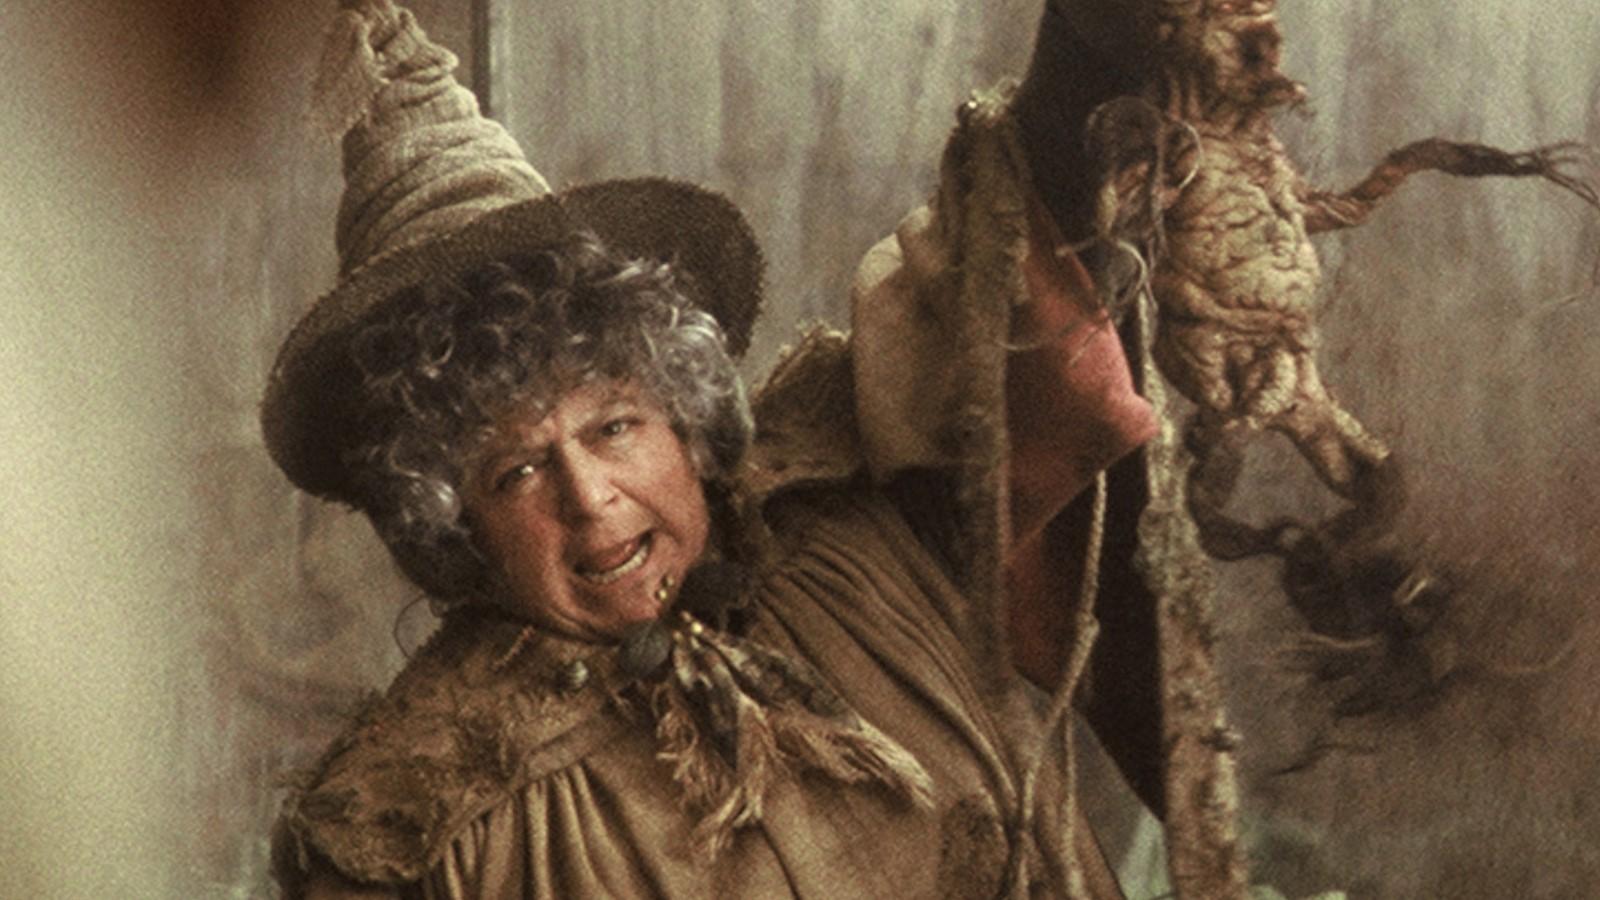 Miriam Margolyes as Professor Sprout in Harry Potter, holding up a plant